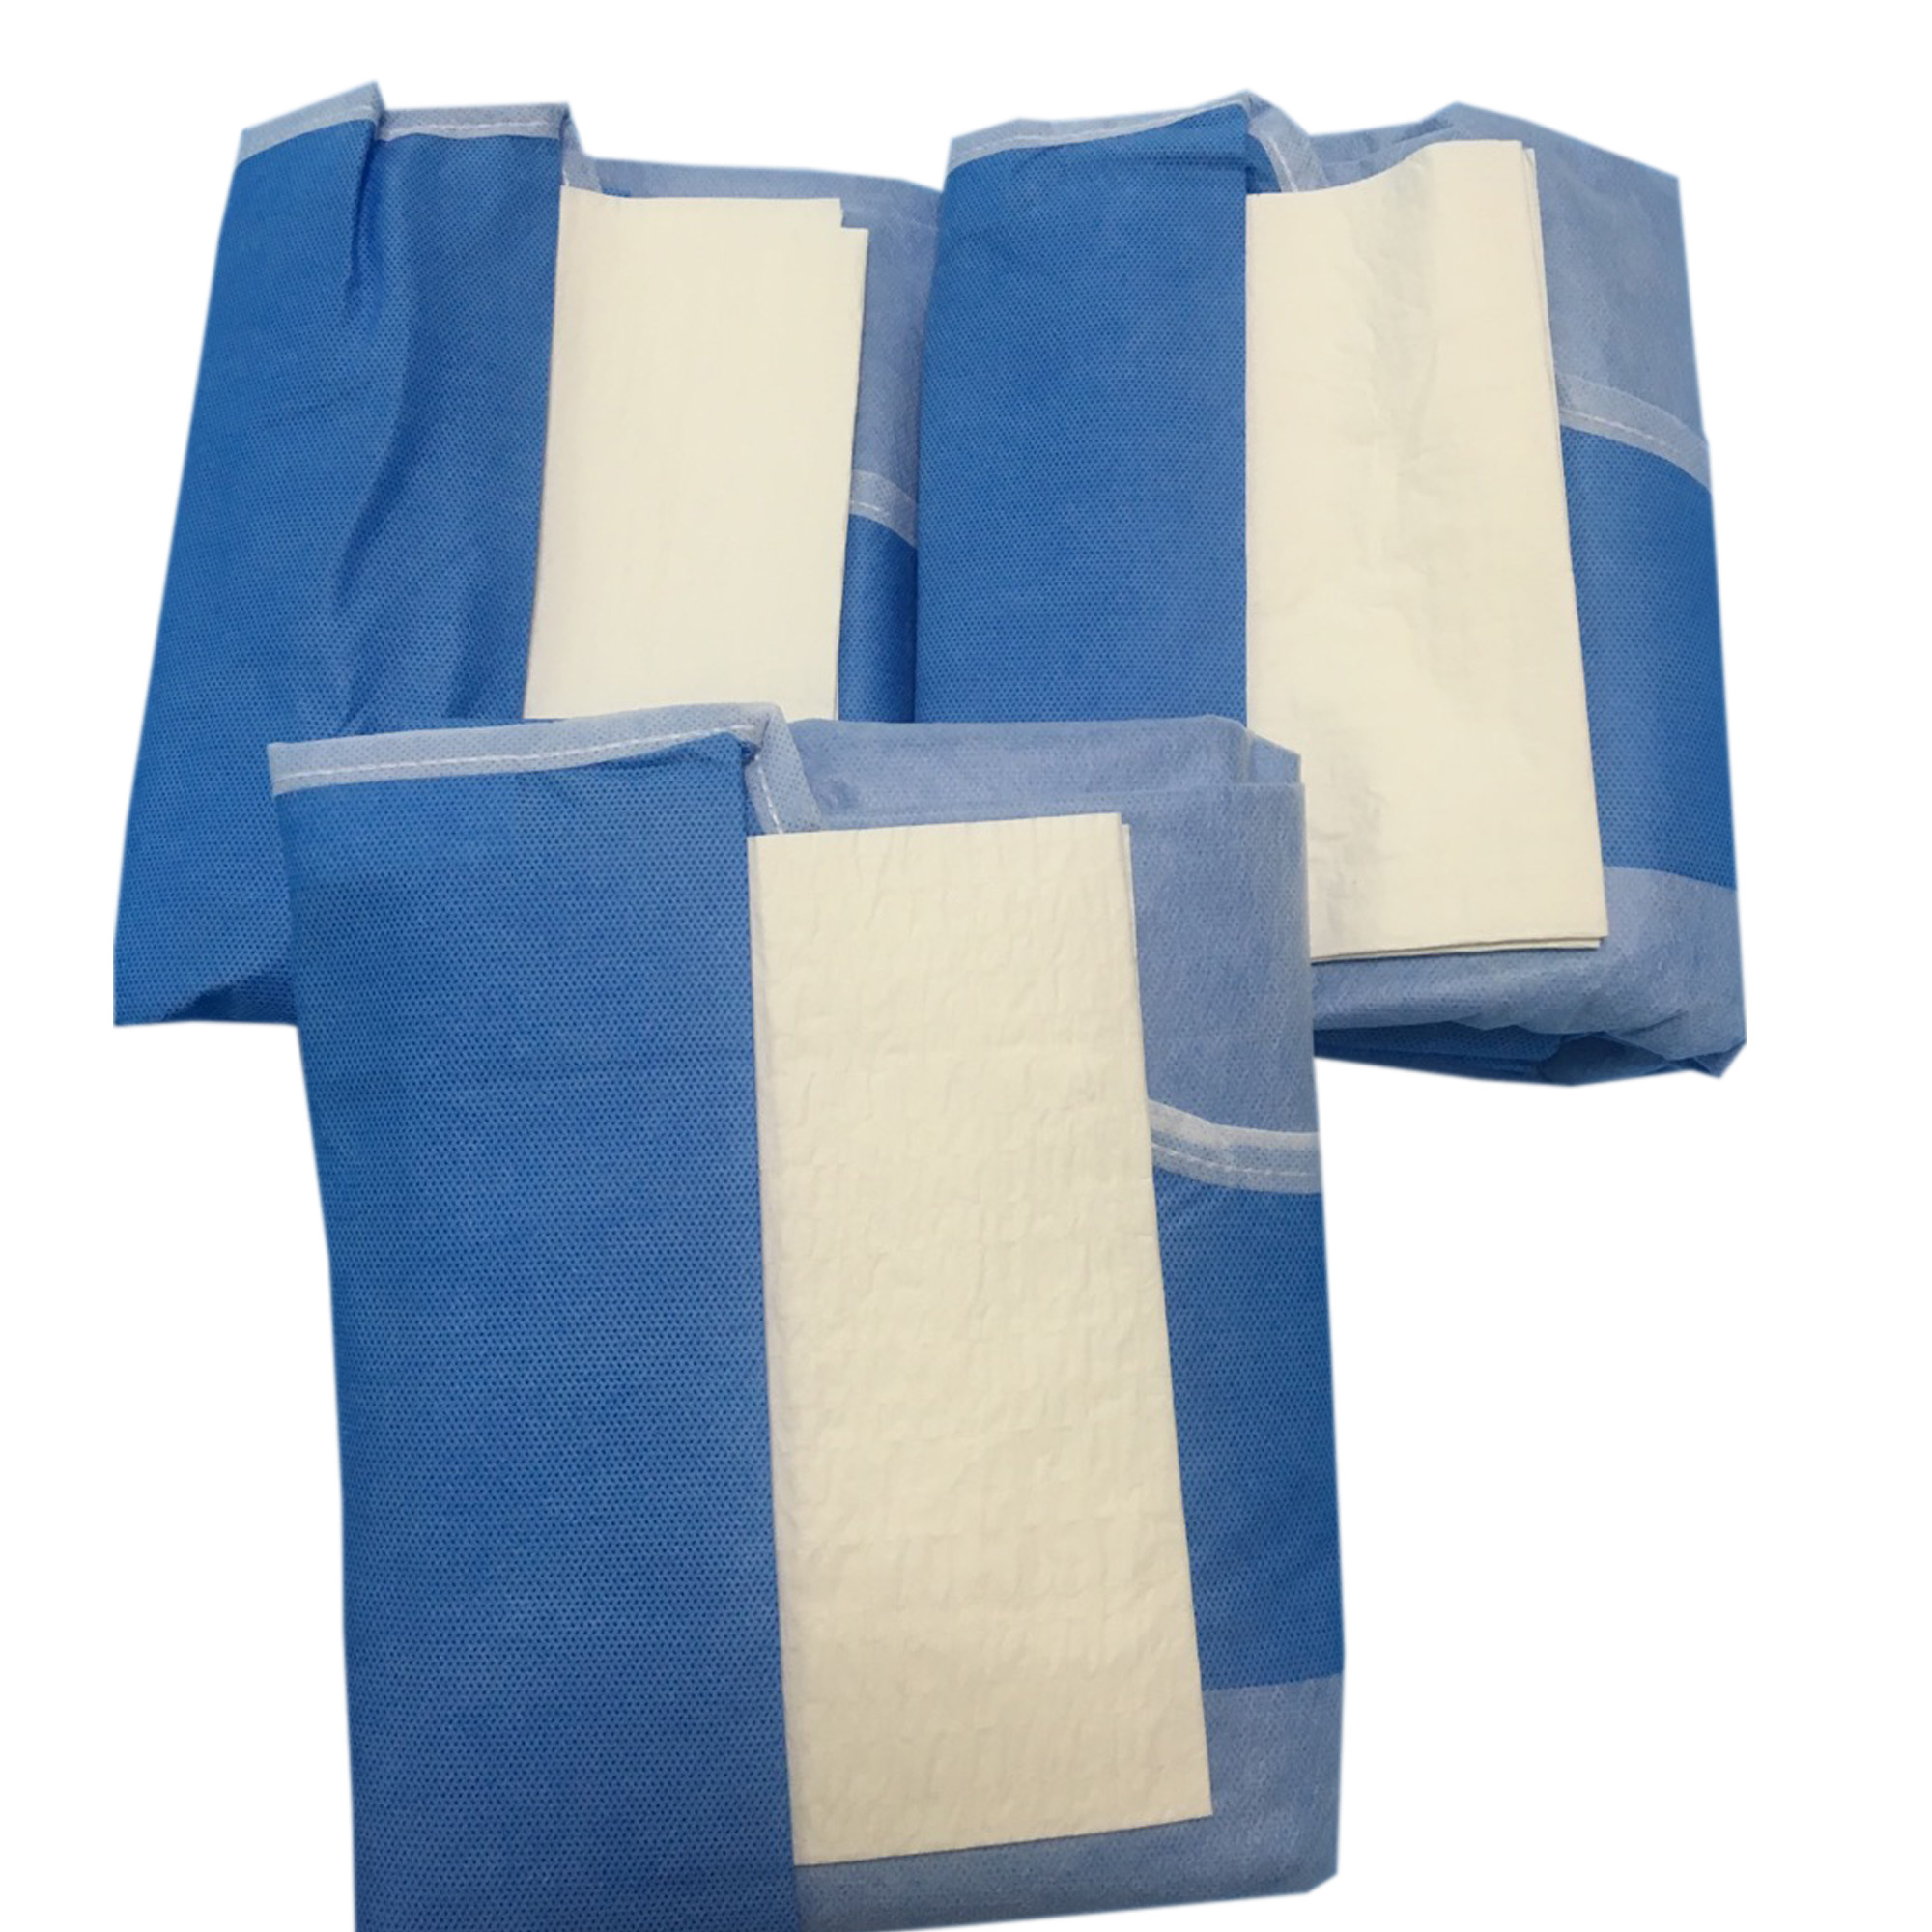 AAMI LEVEL3 Disposable SMMS surgical gown 